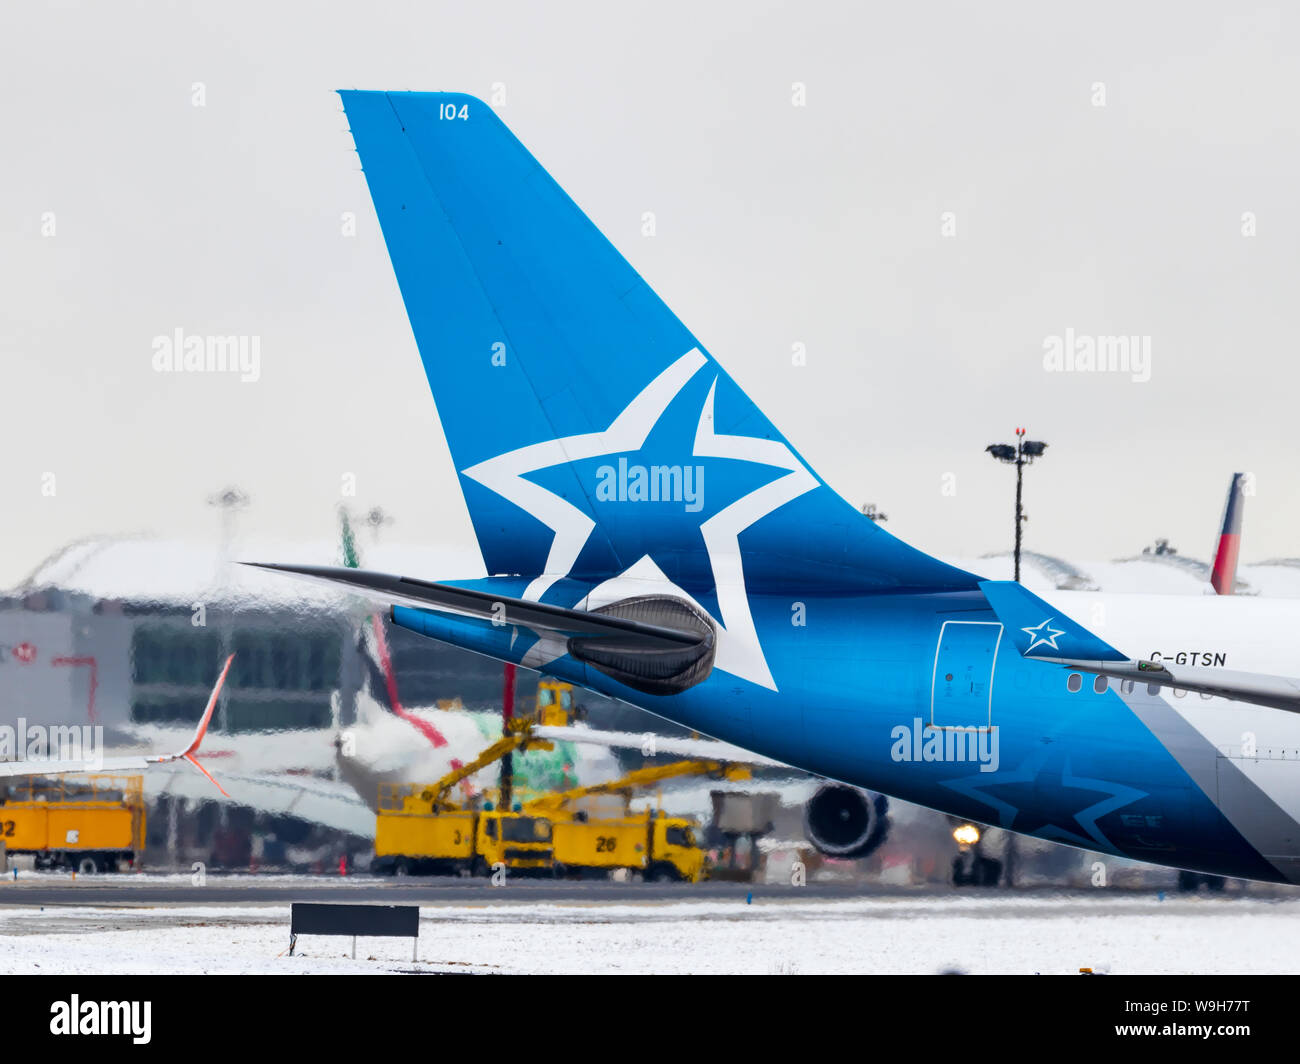 Air Transat Airbus A330 tail seen at Toronto Pearson Intl. Airport after de-icing on a snowy morning. Stock Photo